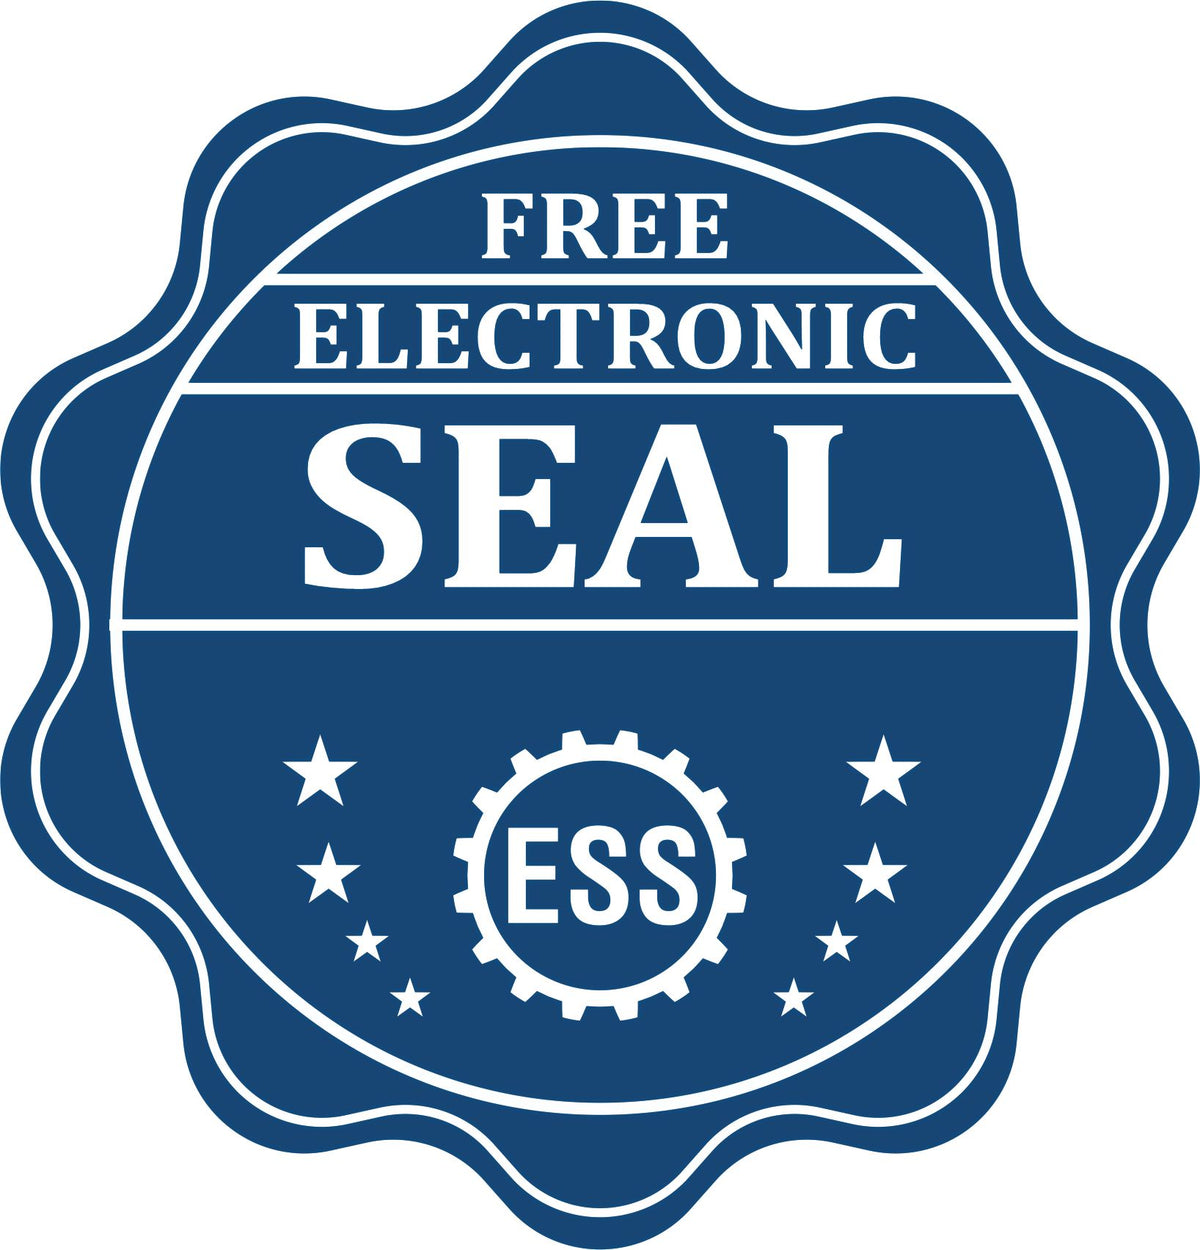 A badge showing a free electronic seal for the Soft Michigan Professional Engineer Seal with stars and the ESS gear on the emblem.